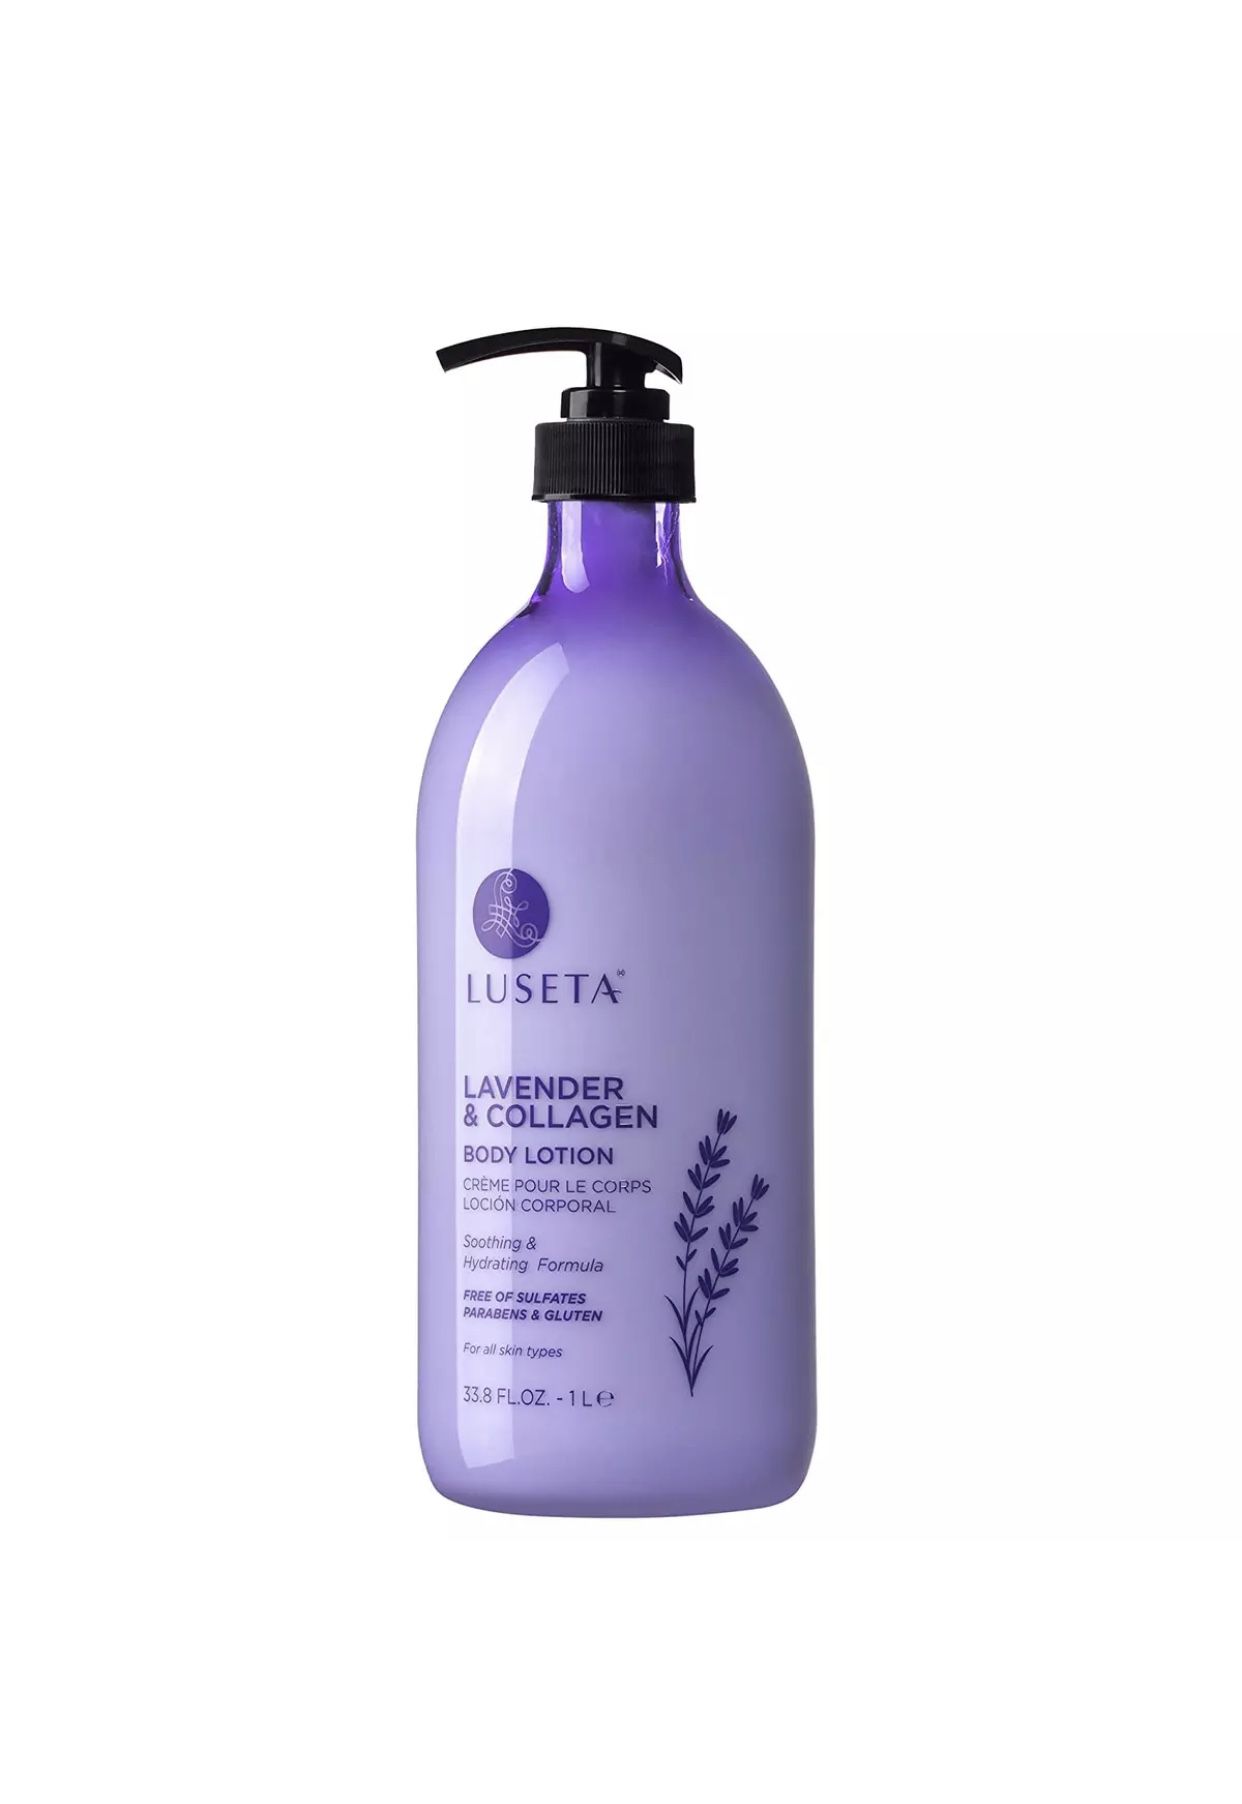 Luseta Lavender & Collagen Soothing & Hydrating Formula Body Lotion 33.8 oz New